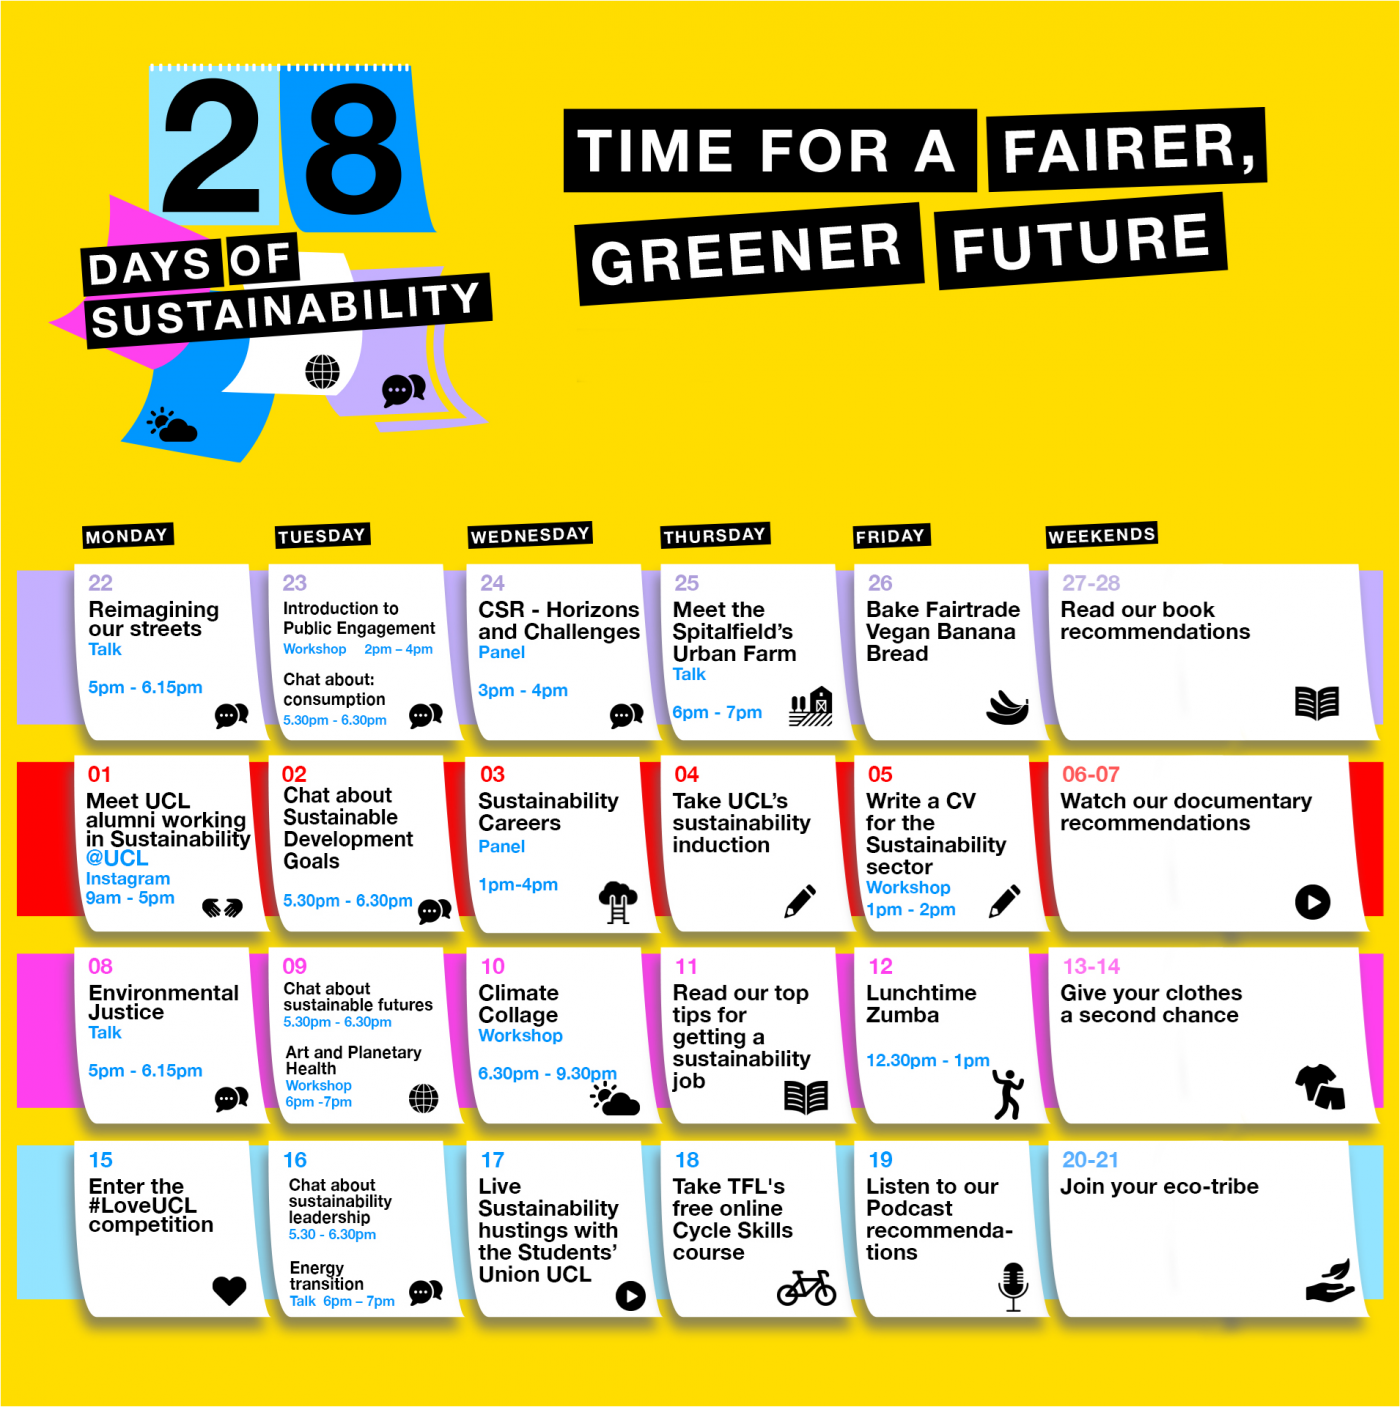 28 Days of Sustainability Time for a fairer, greener future